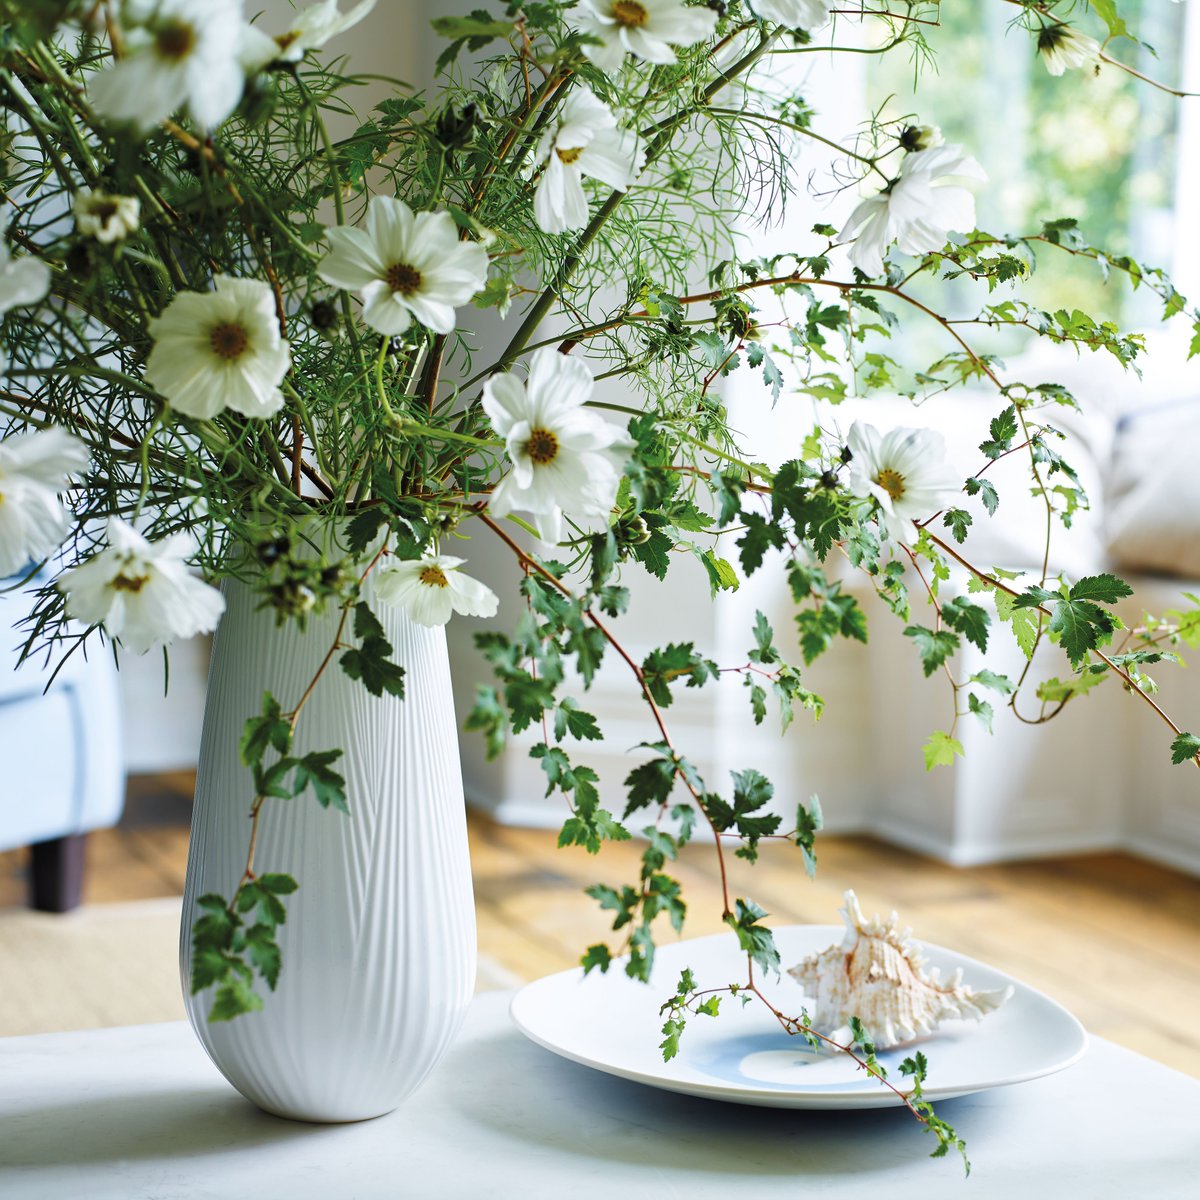 Striking in simplicity - The White Folia collection is crafted from fine bone china and will add a touch of nature to your home. Click here to explore the White Folia range: ow.ly/Dxul30lL293